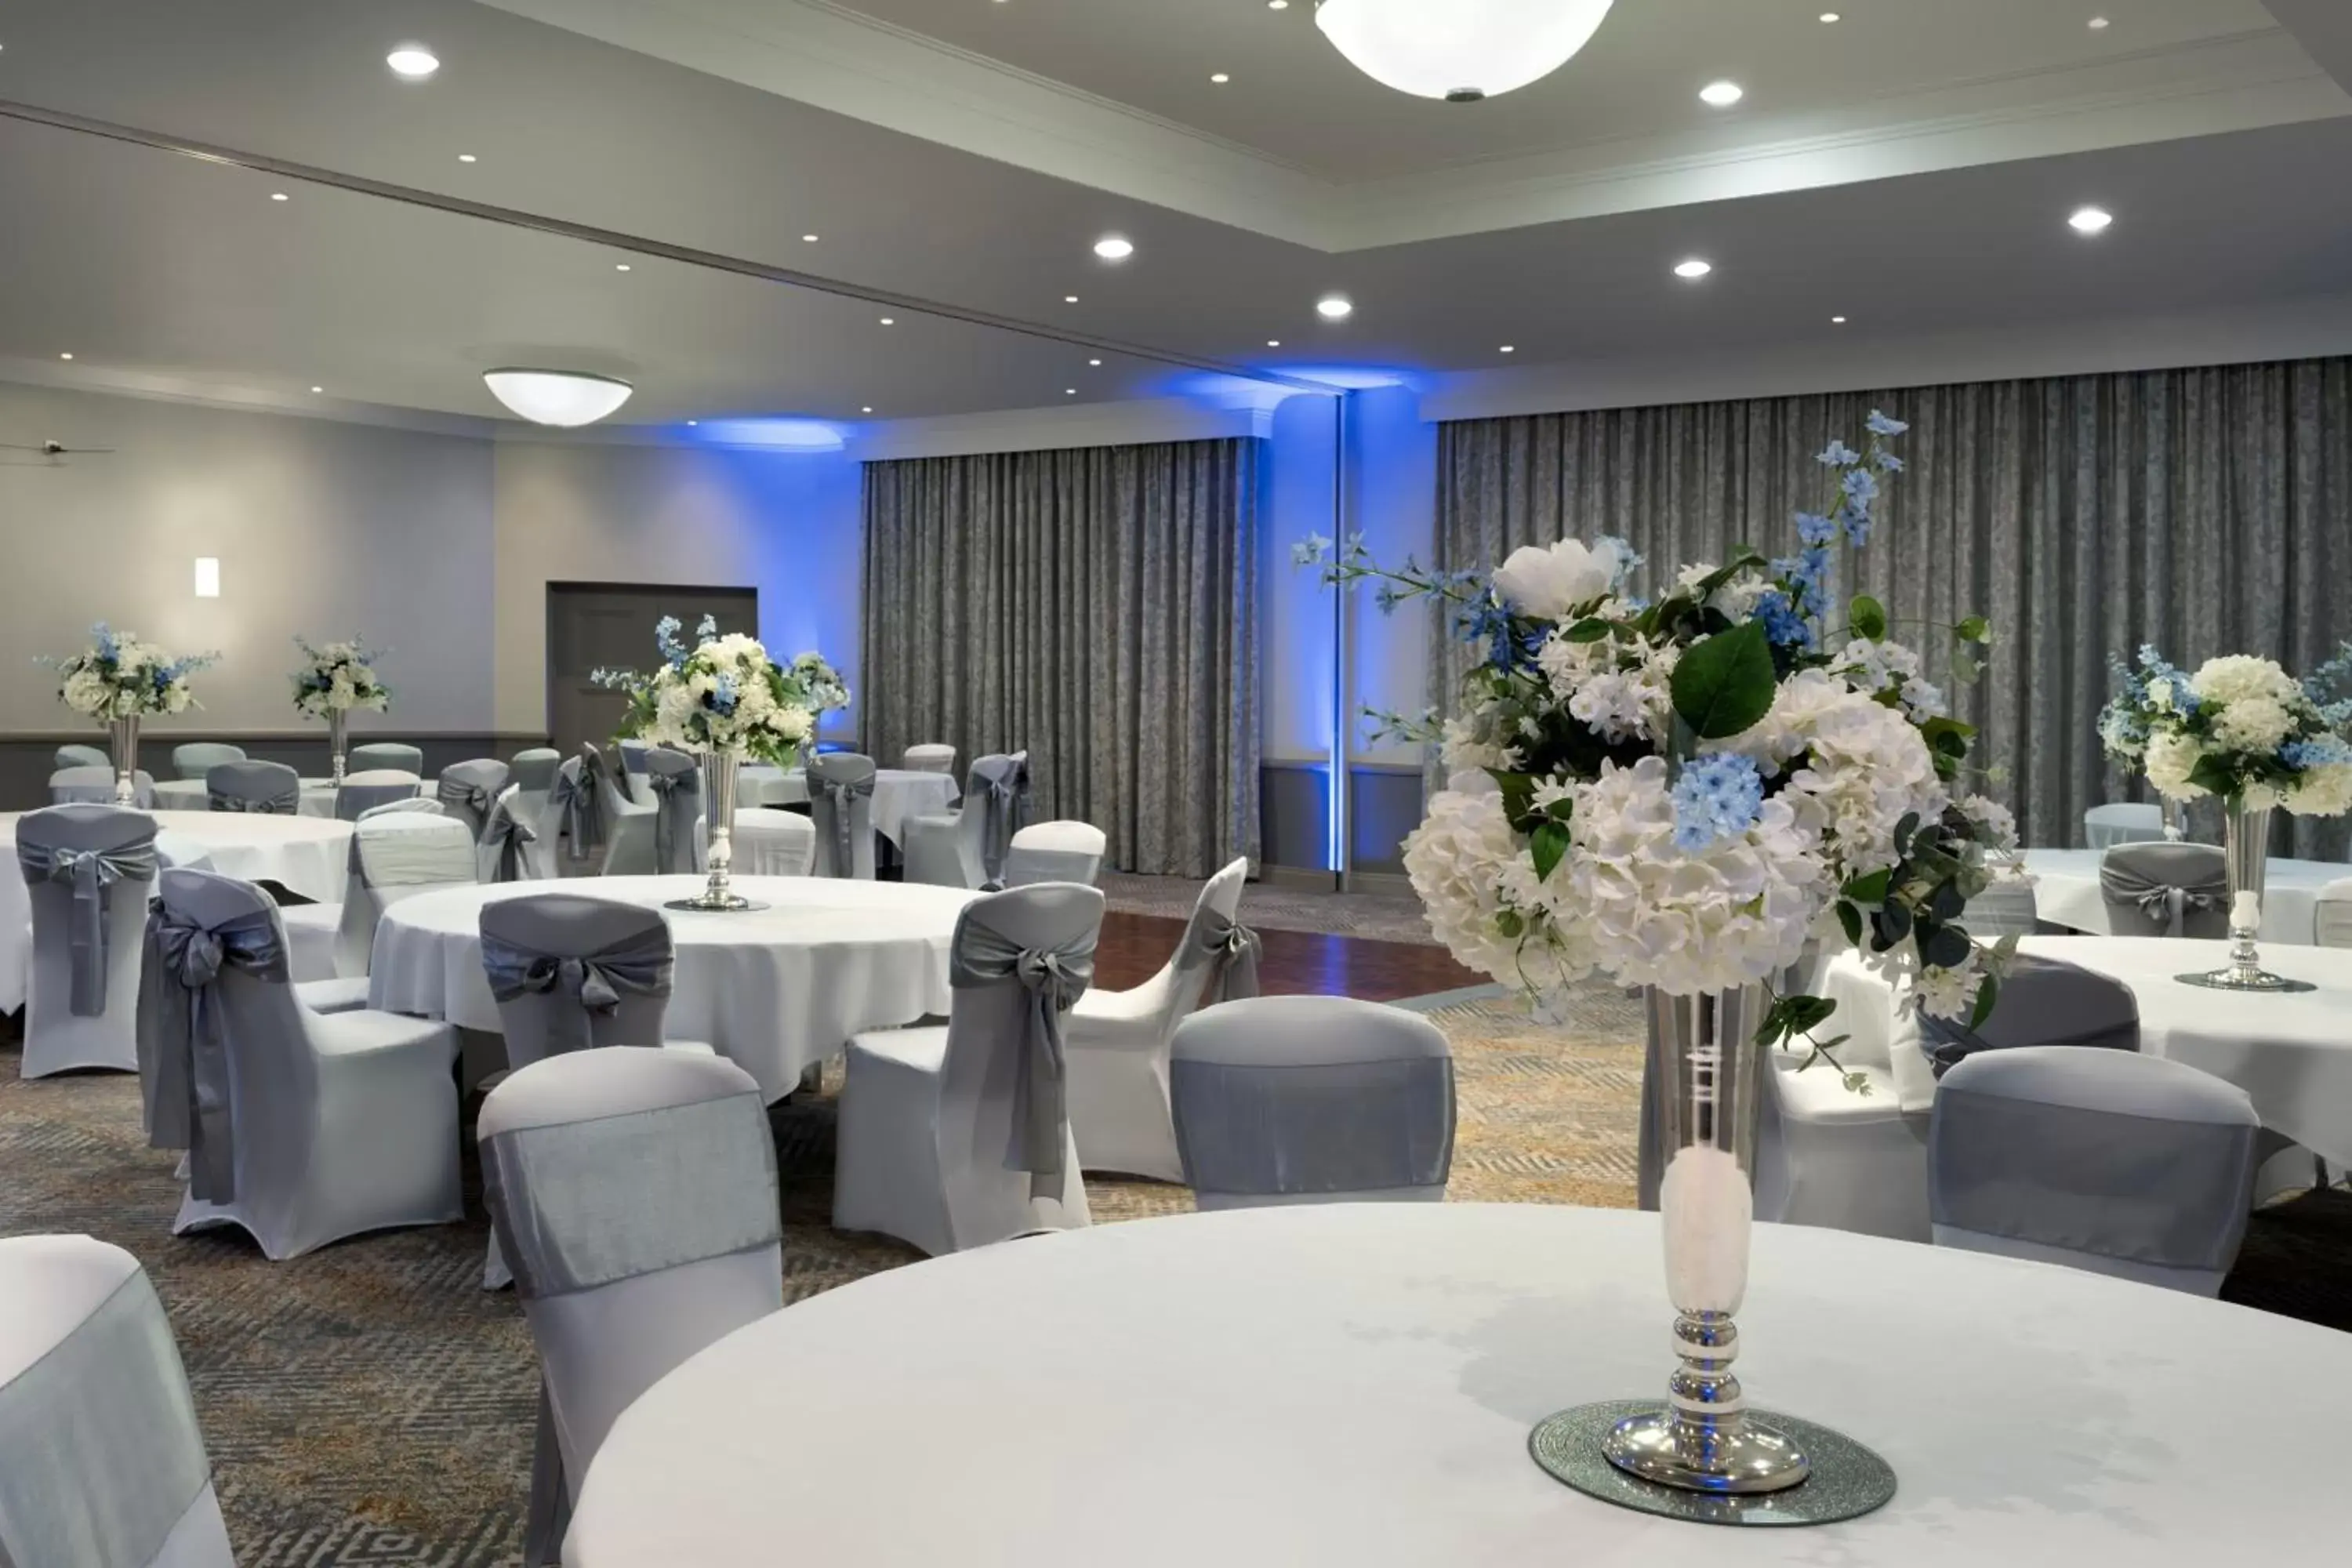 Meeting/conference room, Banquet Facilities in Delta Hotels by Marriott Waltham Abbey